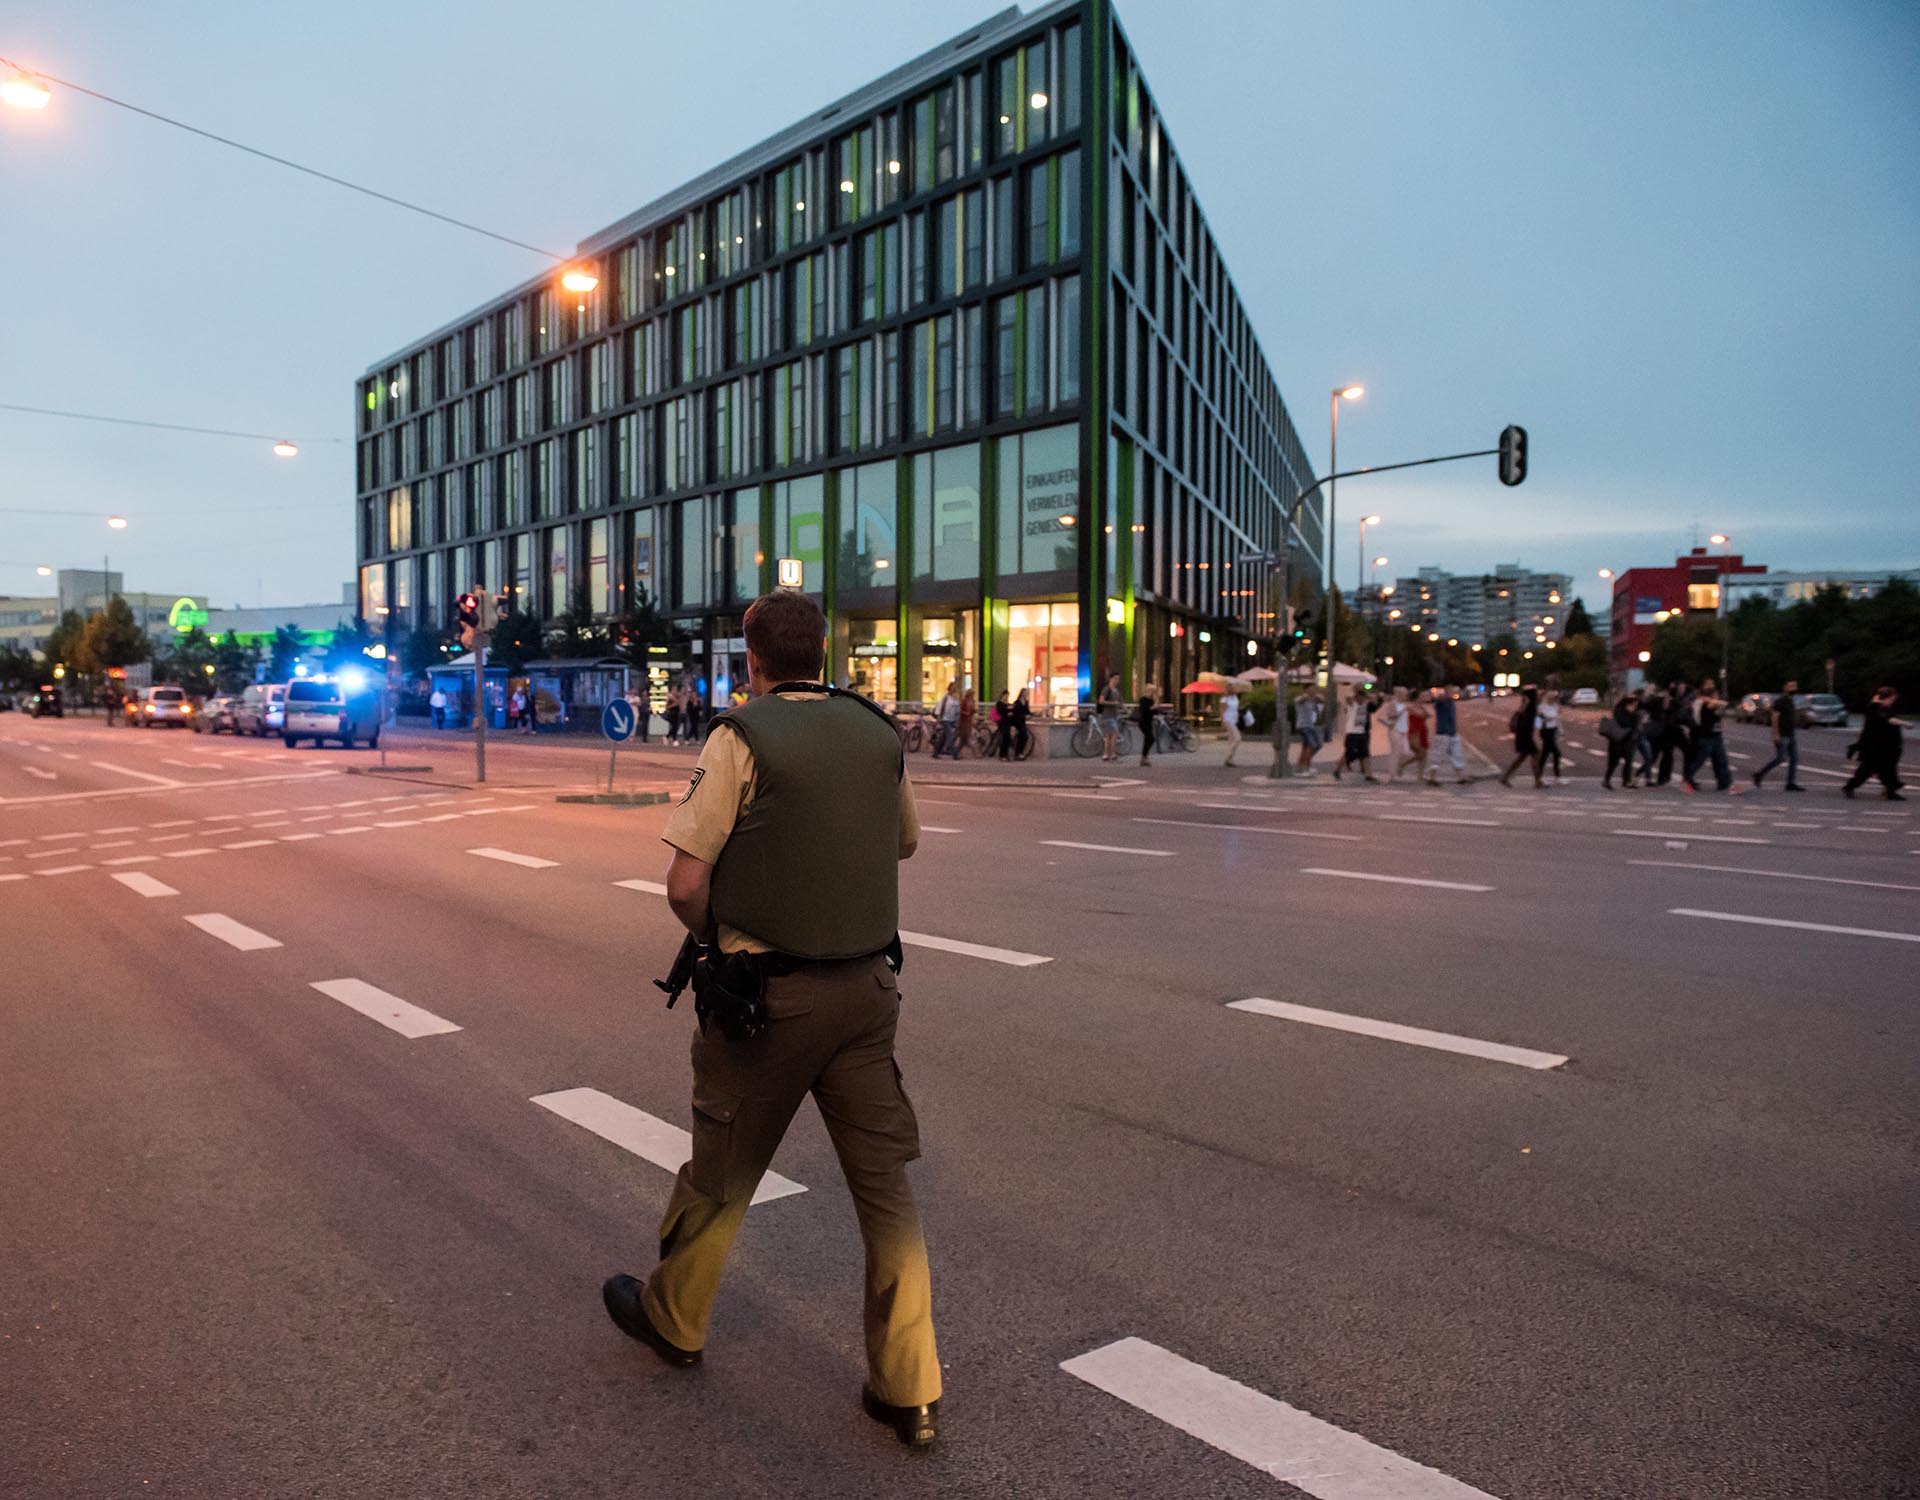 A policeman patrols as people are beeing evacuated (R) from a shopping mall in Munich on July 22, 2016 following a shooting earlier. At least one person has been killed and 10 wounded in a shooting at a shopping centre in Munich on Friday, German police said. / AFP PHOTO / STRINGER